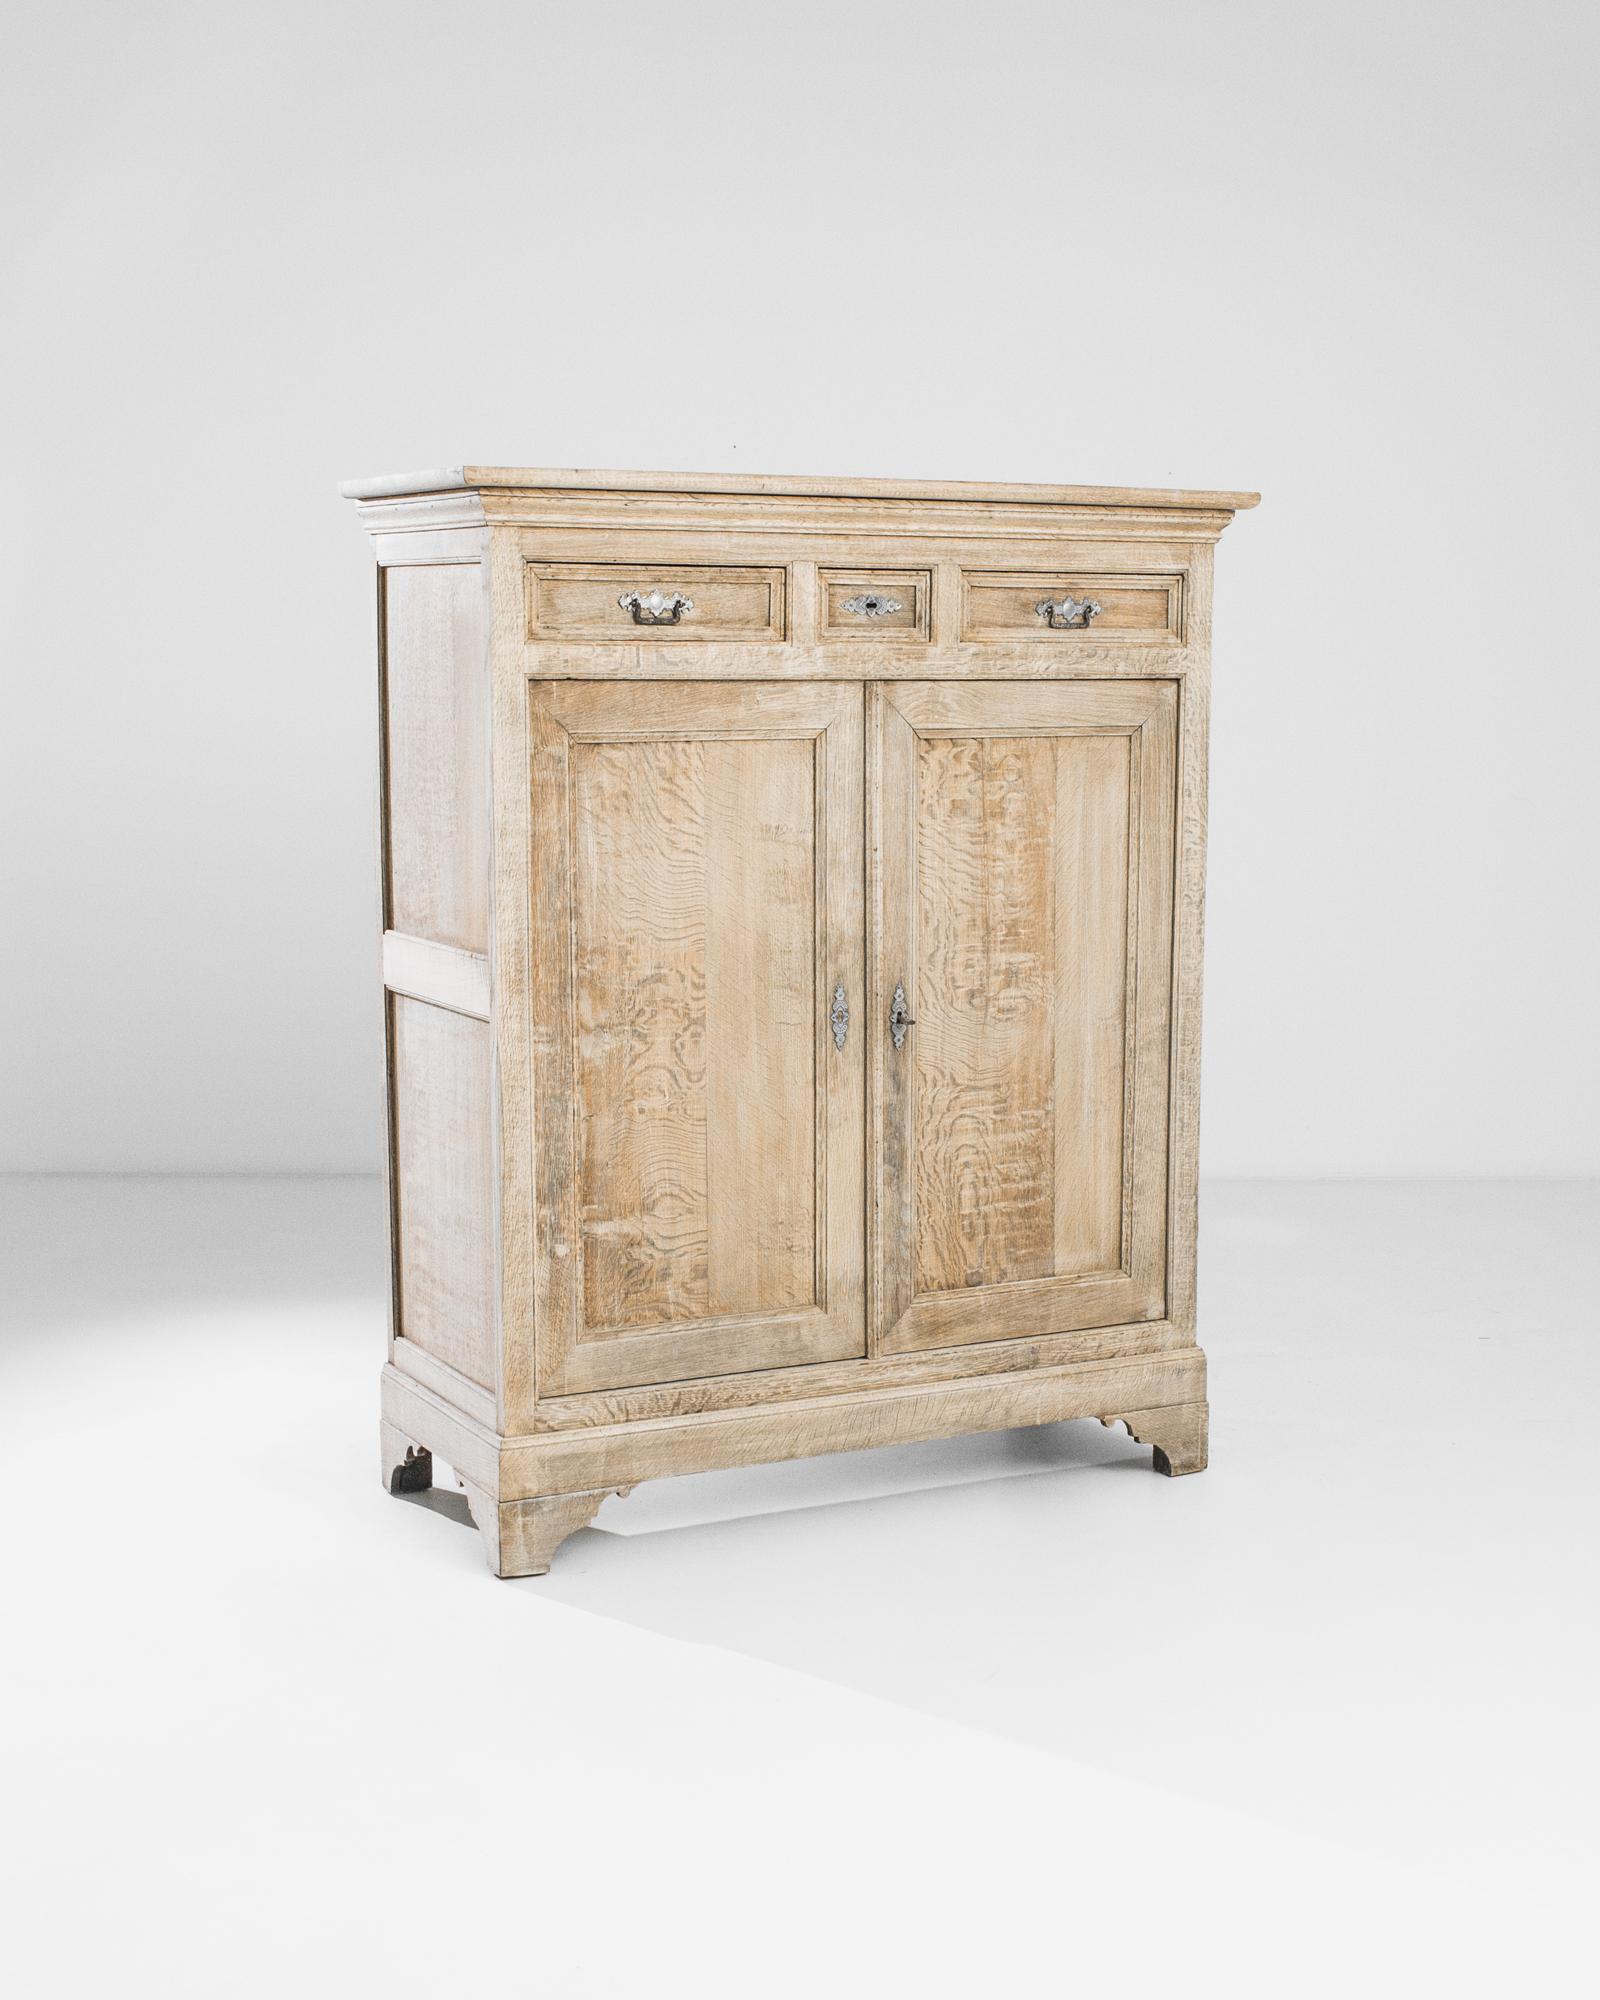 An oak cabinet from 1880s Belgium. Scalloped feet lend the upright case a poised stance. The restoration of the oak showcases its natural beauty — a warm honeyed tone, with a liquid grain. The intricate design of the pewter lock pieces and drawer